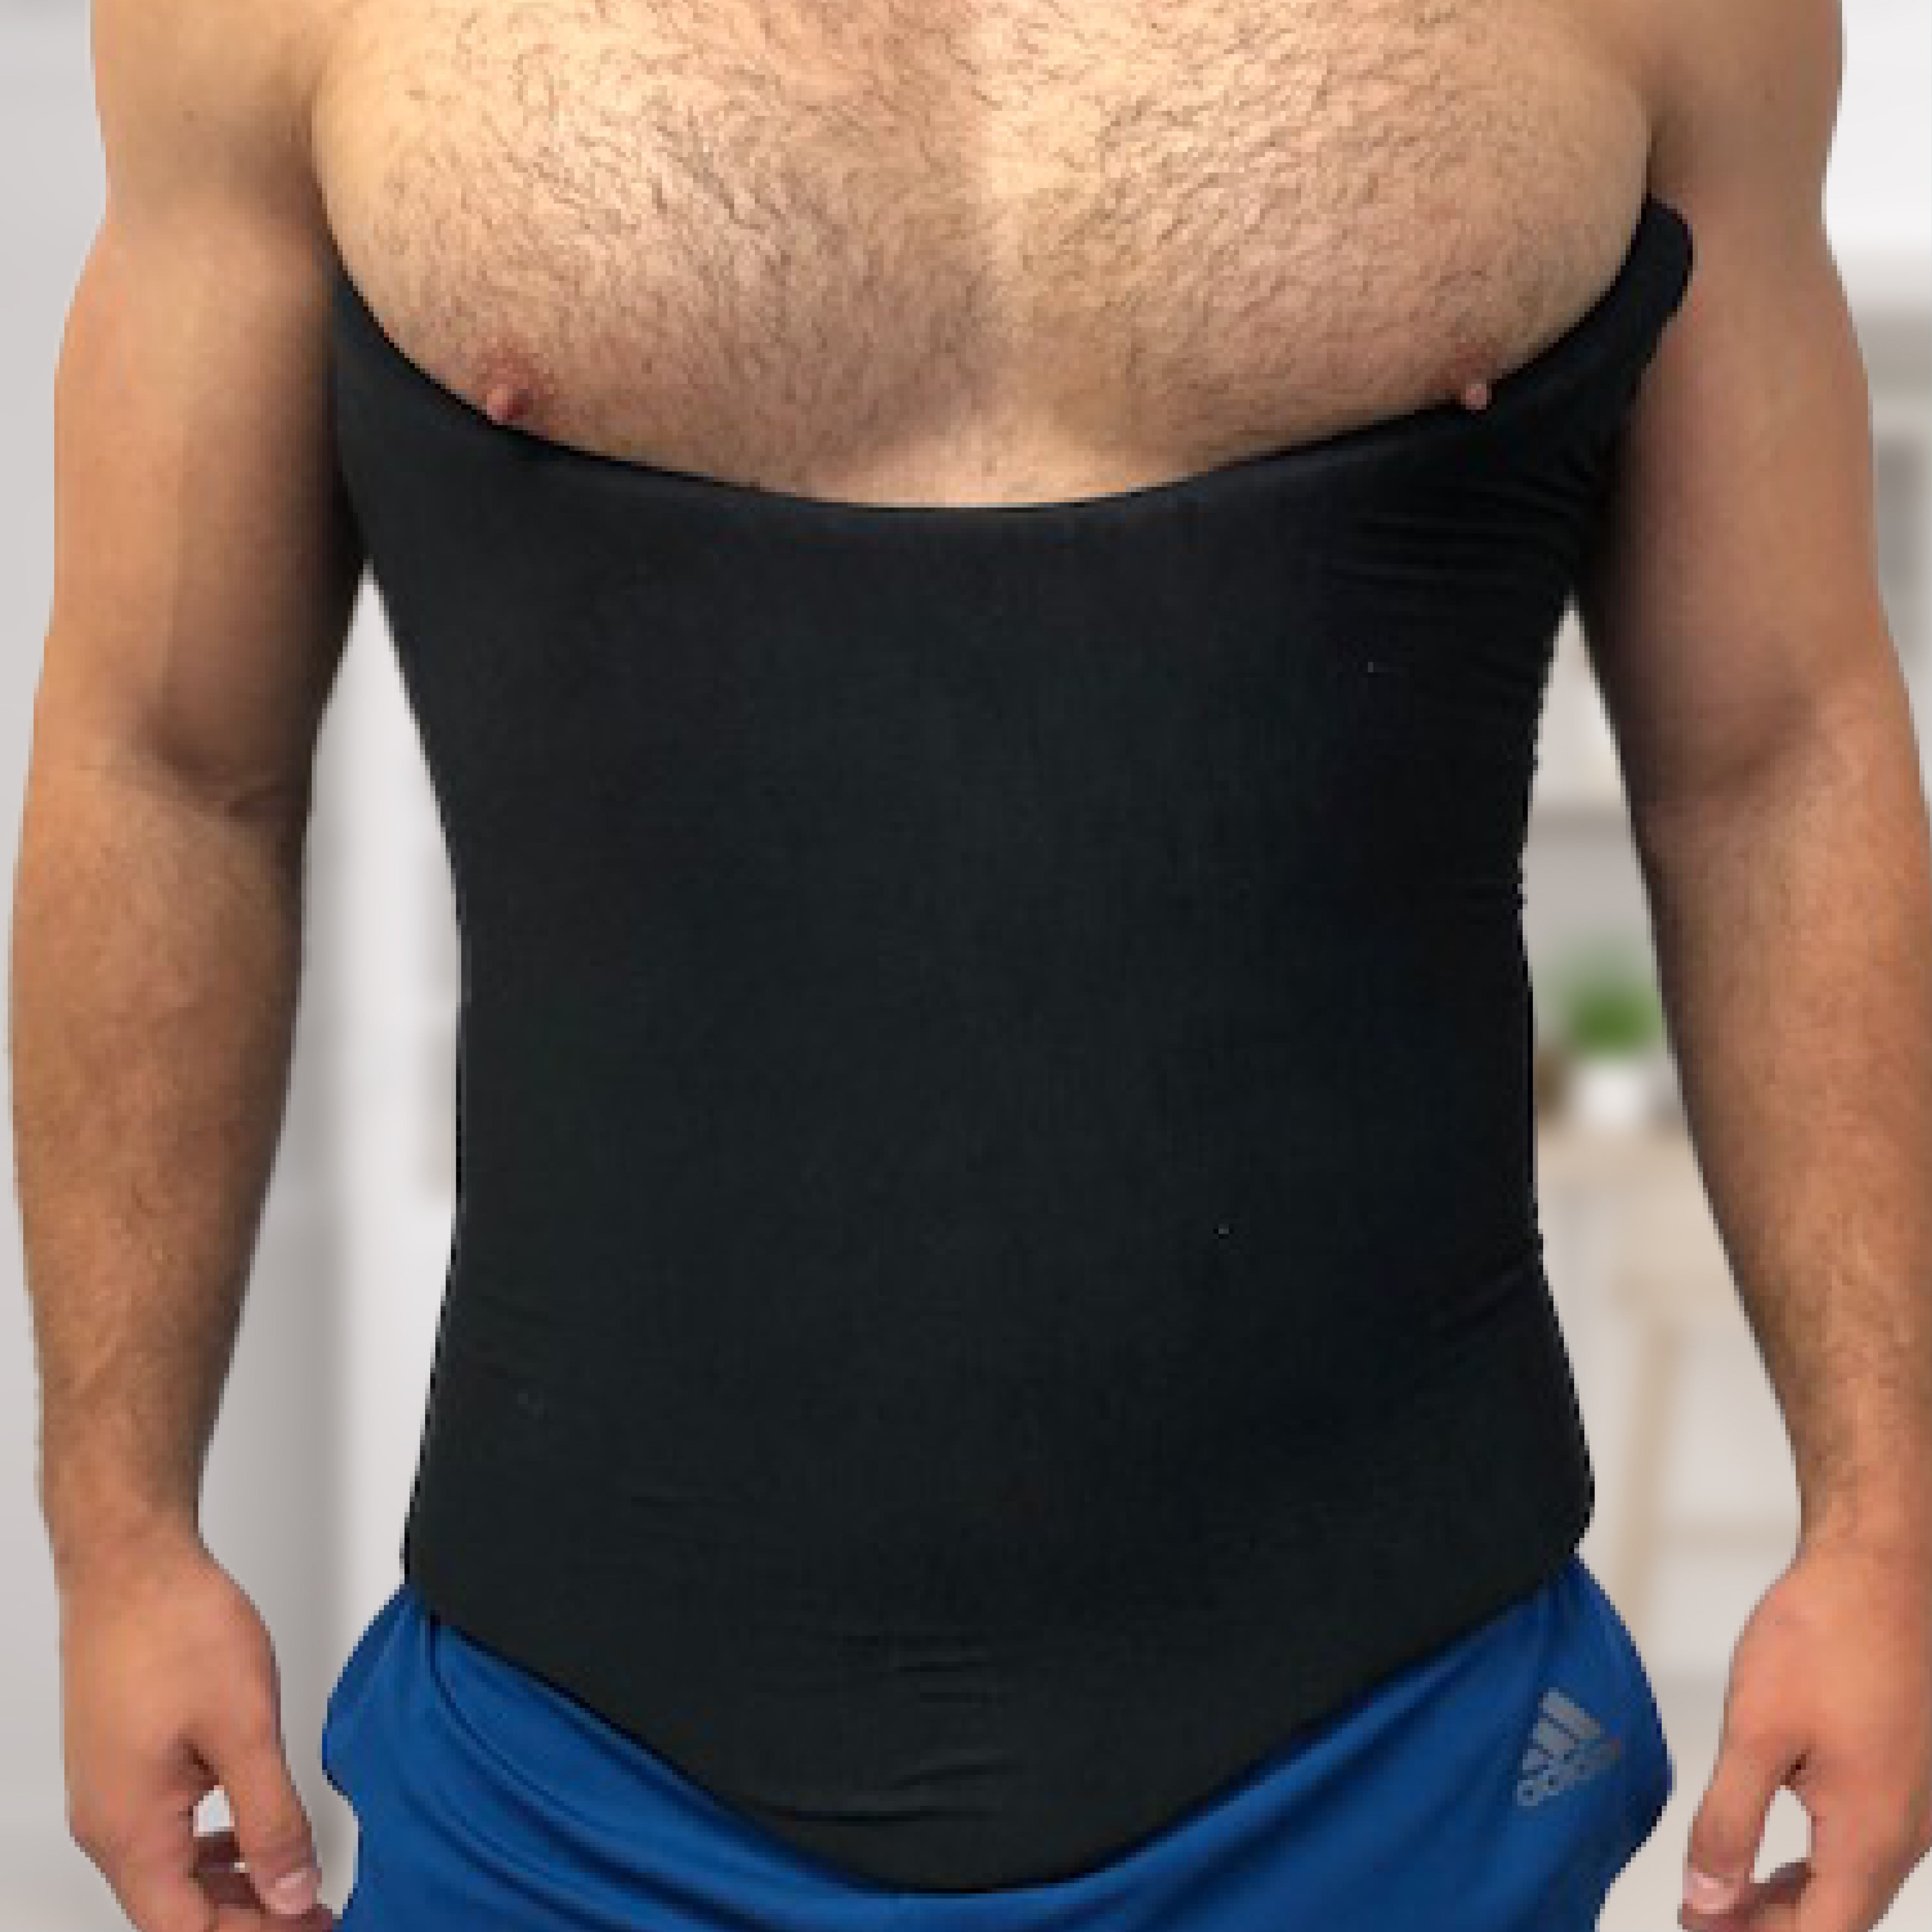 Male garments for liposuction and abdominoplasty - Revée®